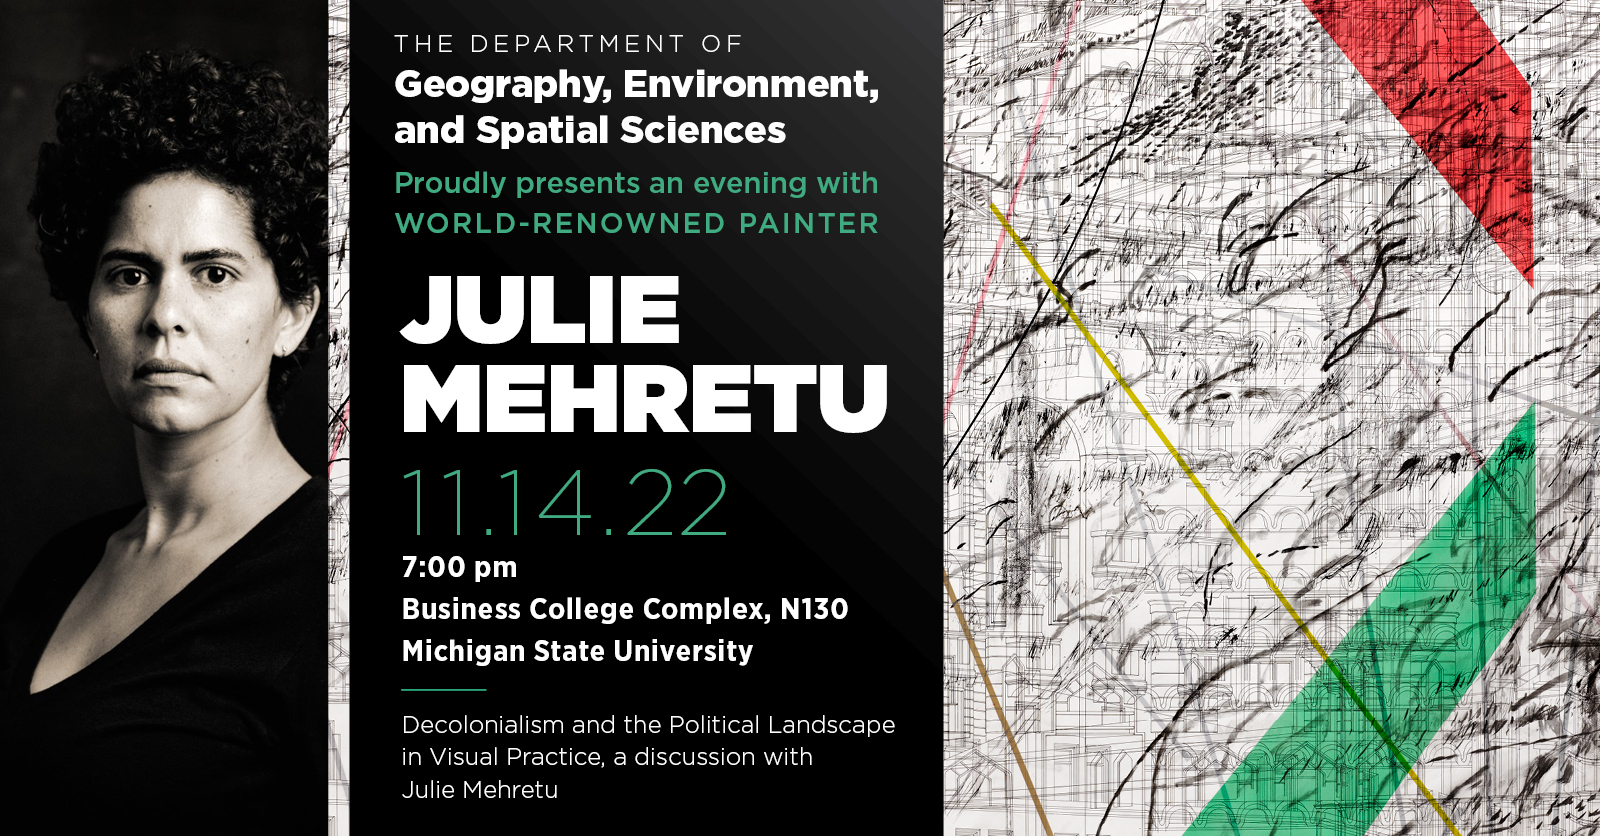 Geography Awareness Week at Michigan State University featuring an Evening with Julie Mehretu